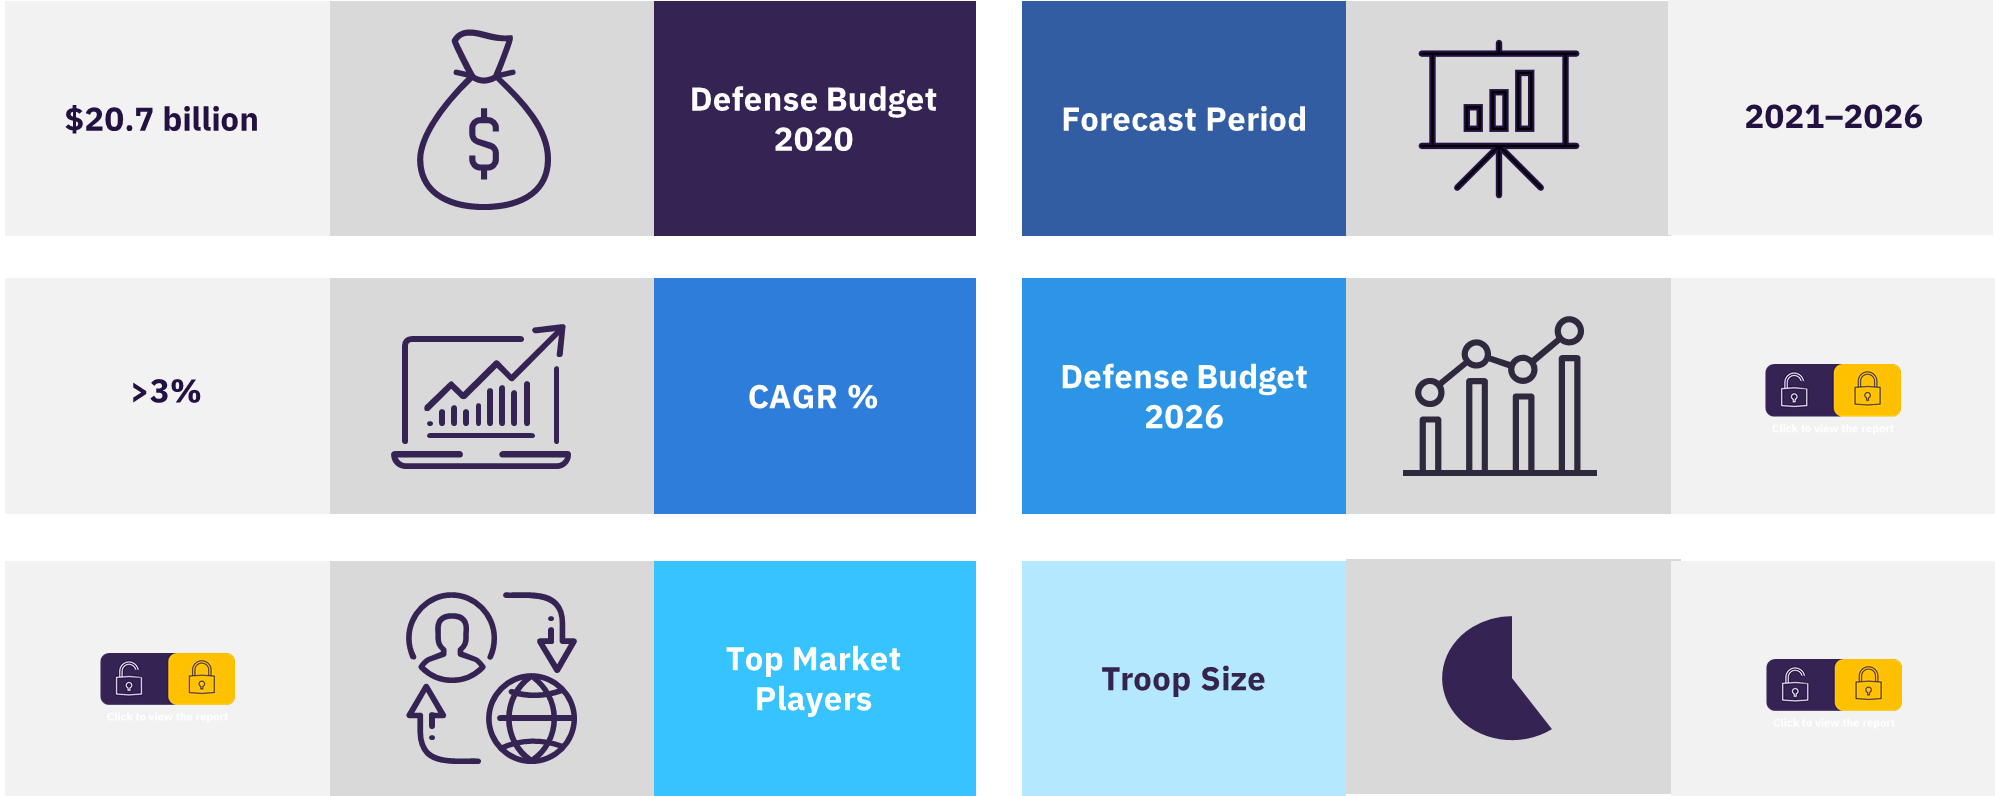 Overview of the defense market in Israel